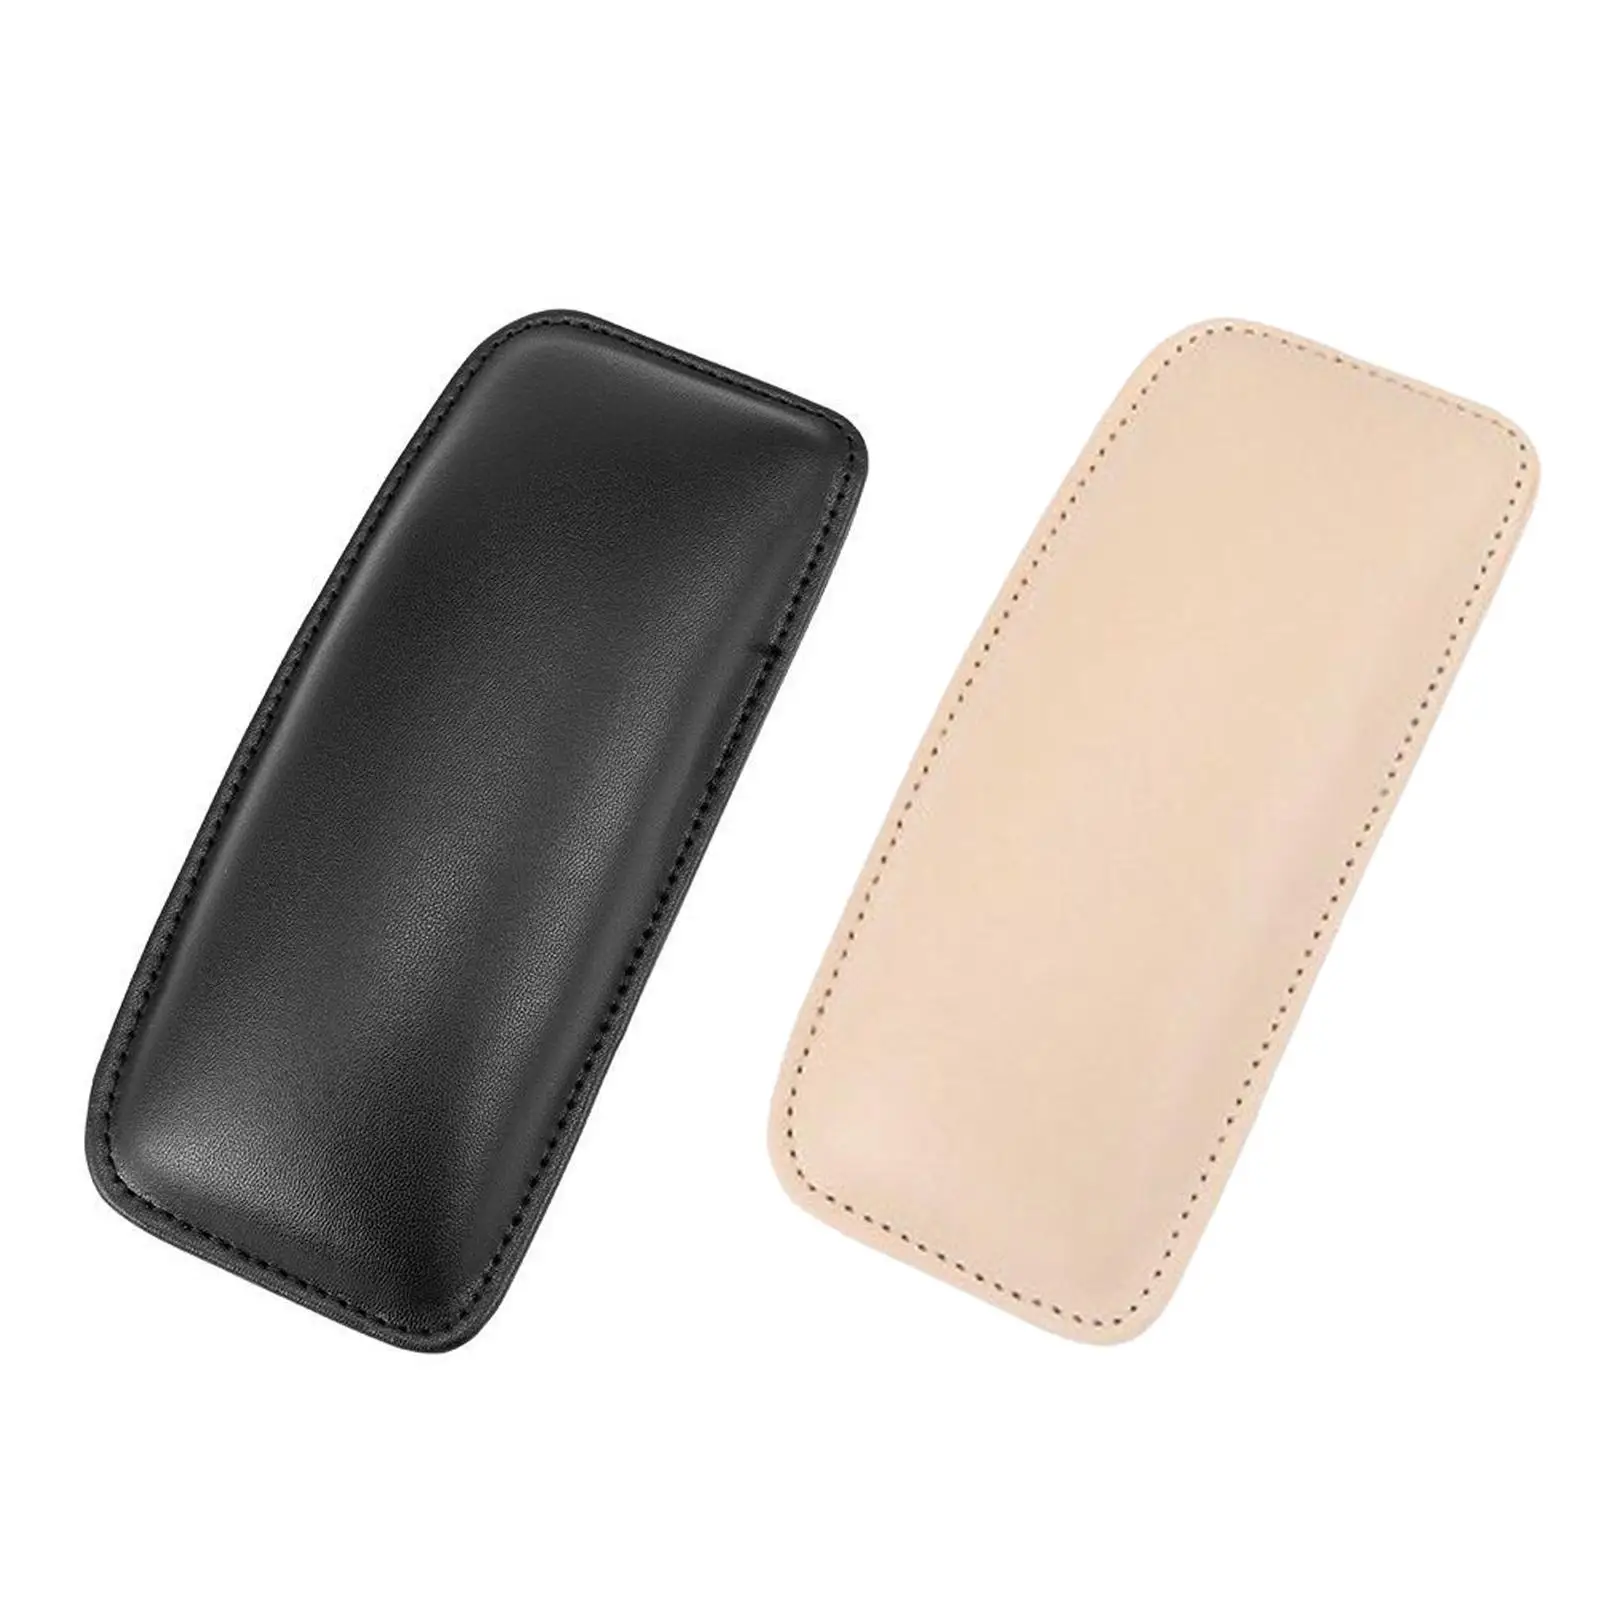 Center Console Knee Pad Thigh Support 22x8cm Comfort Pillow Car Door Armrest Elbow Pad PU Leather for Car Automotive Truck